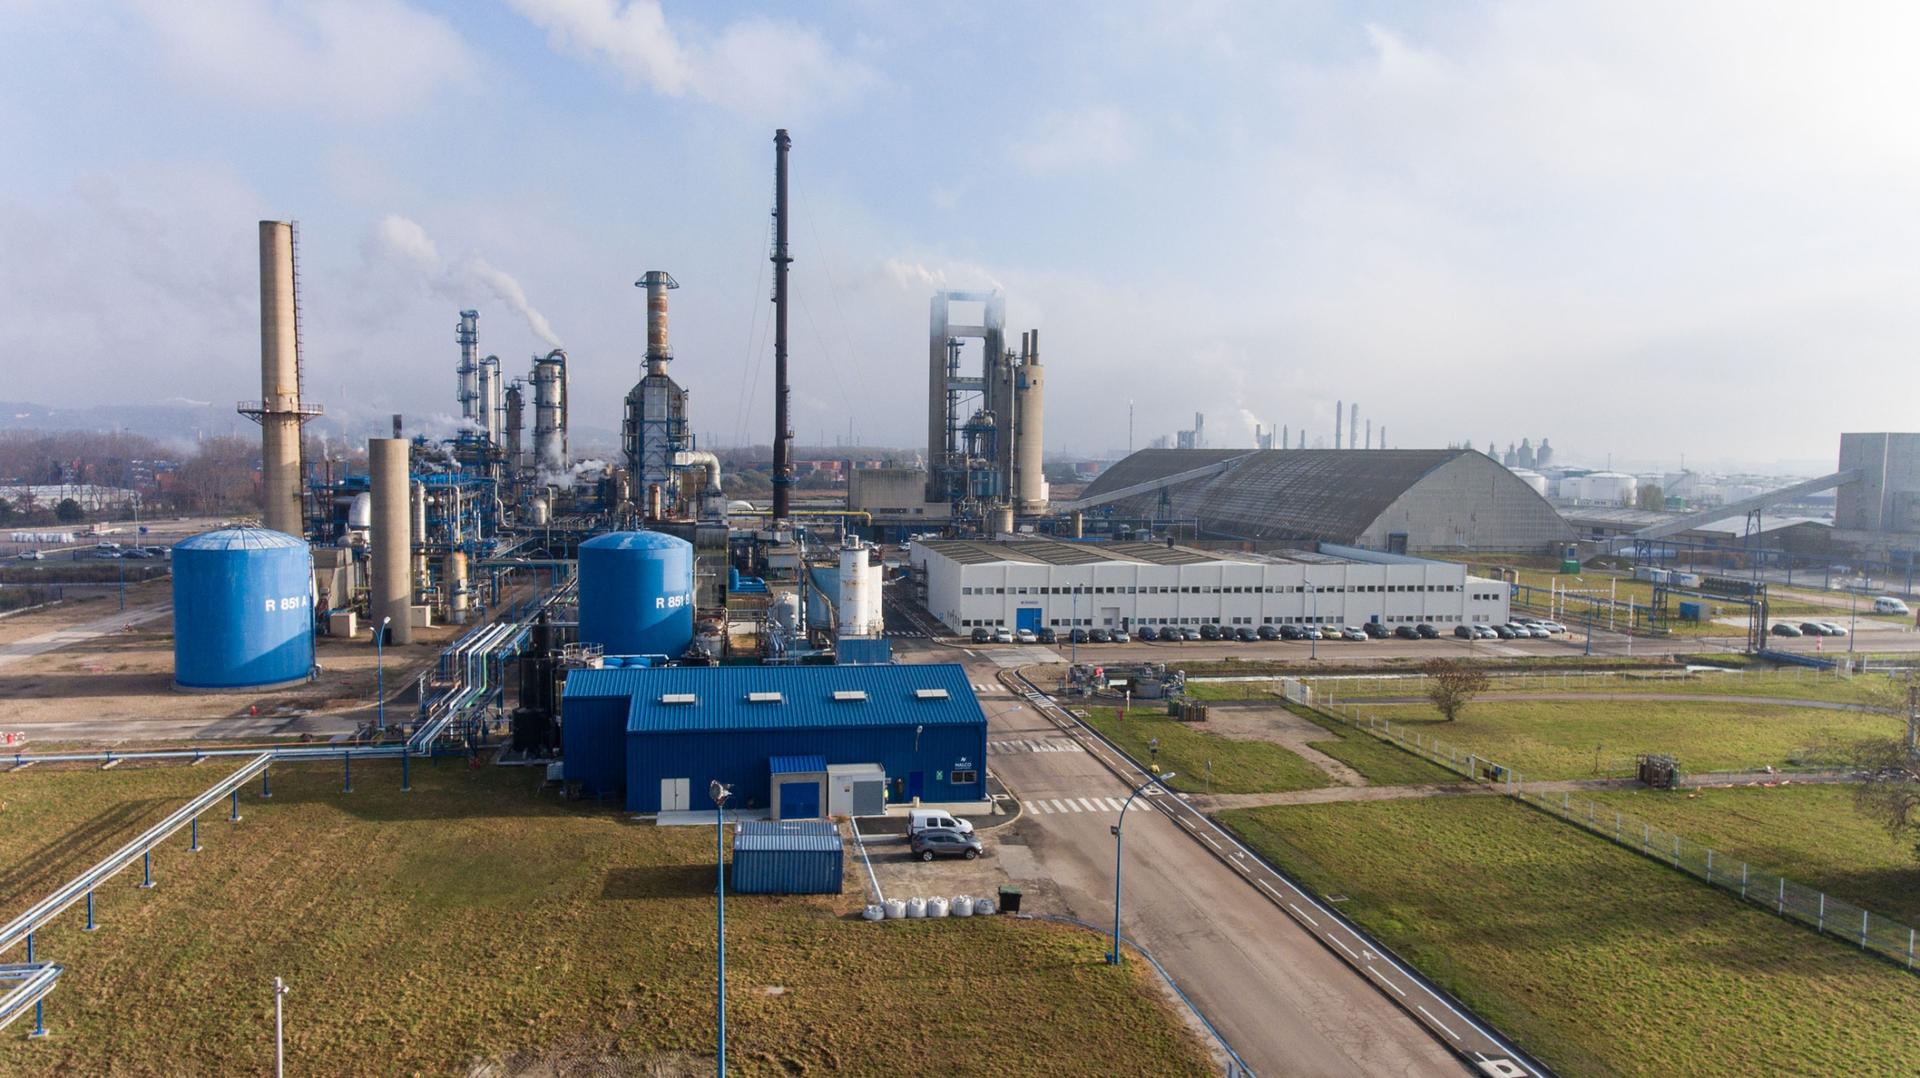 The fertilizer company Yara International's production plant in Le Havre, France.